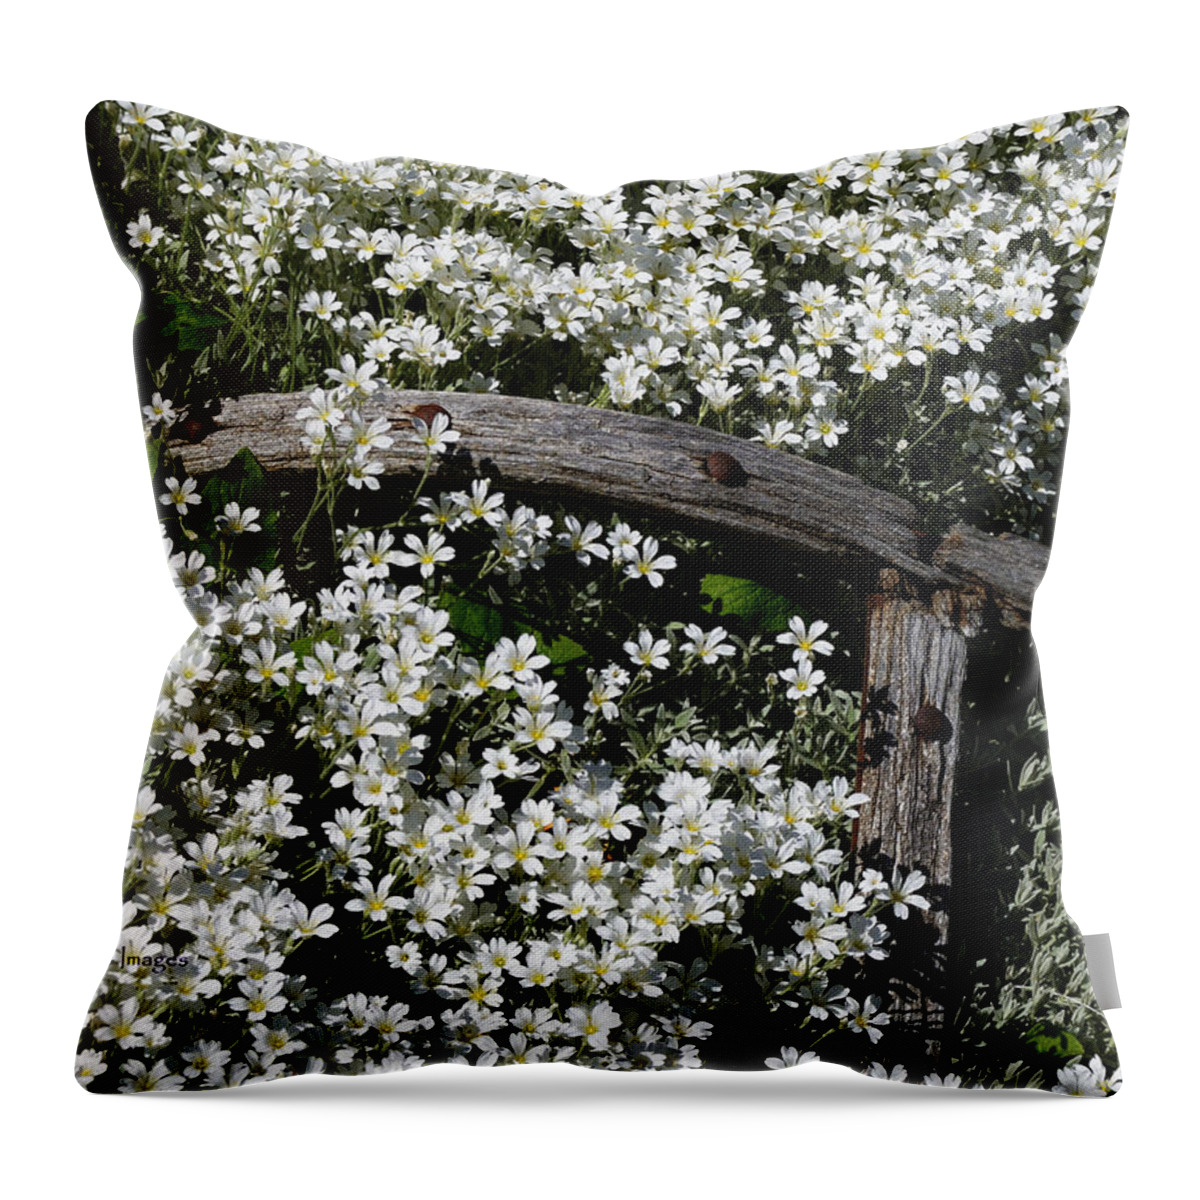 Flowers Throw Pillow featuring the photograph Flower Bed by Kae Cheatham